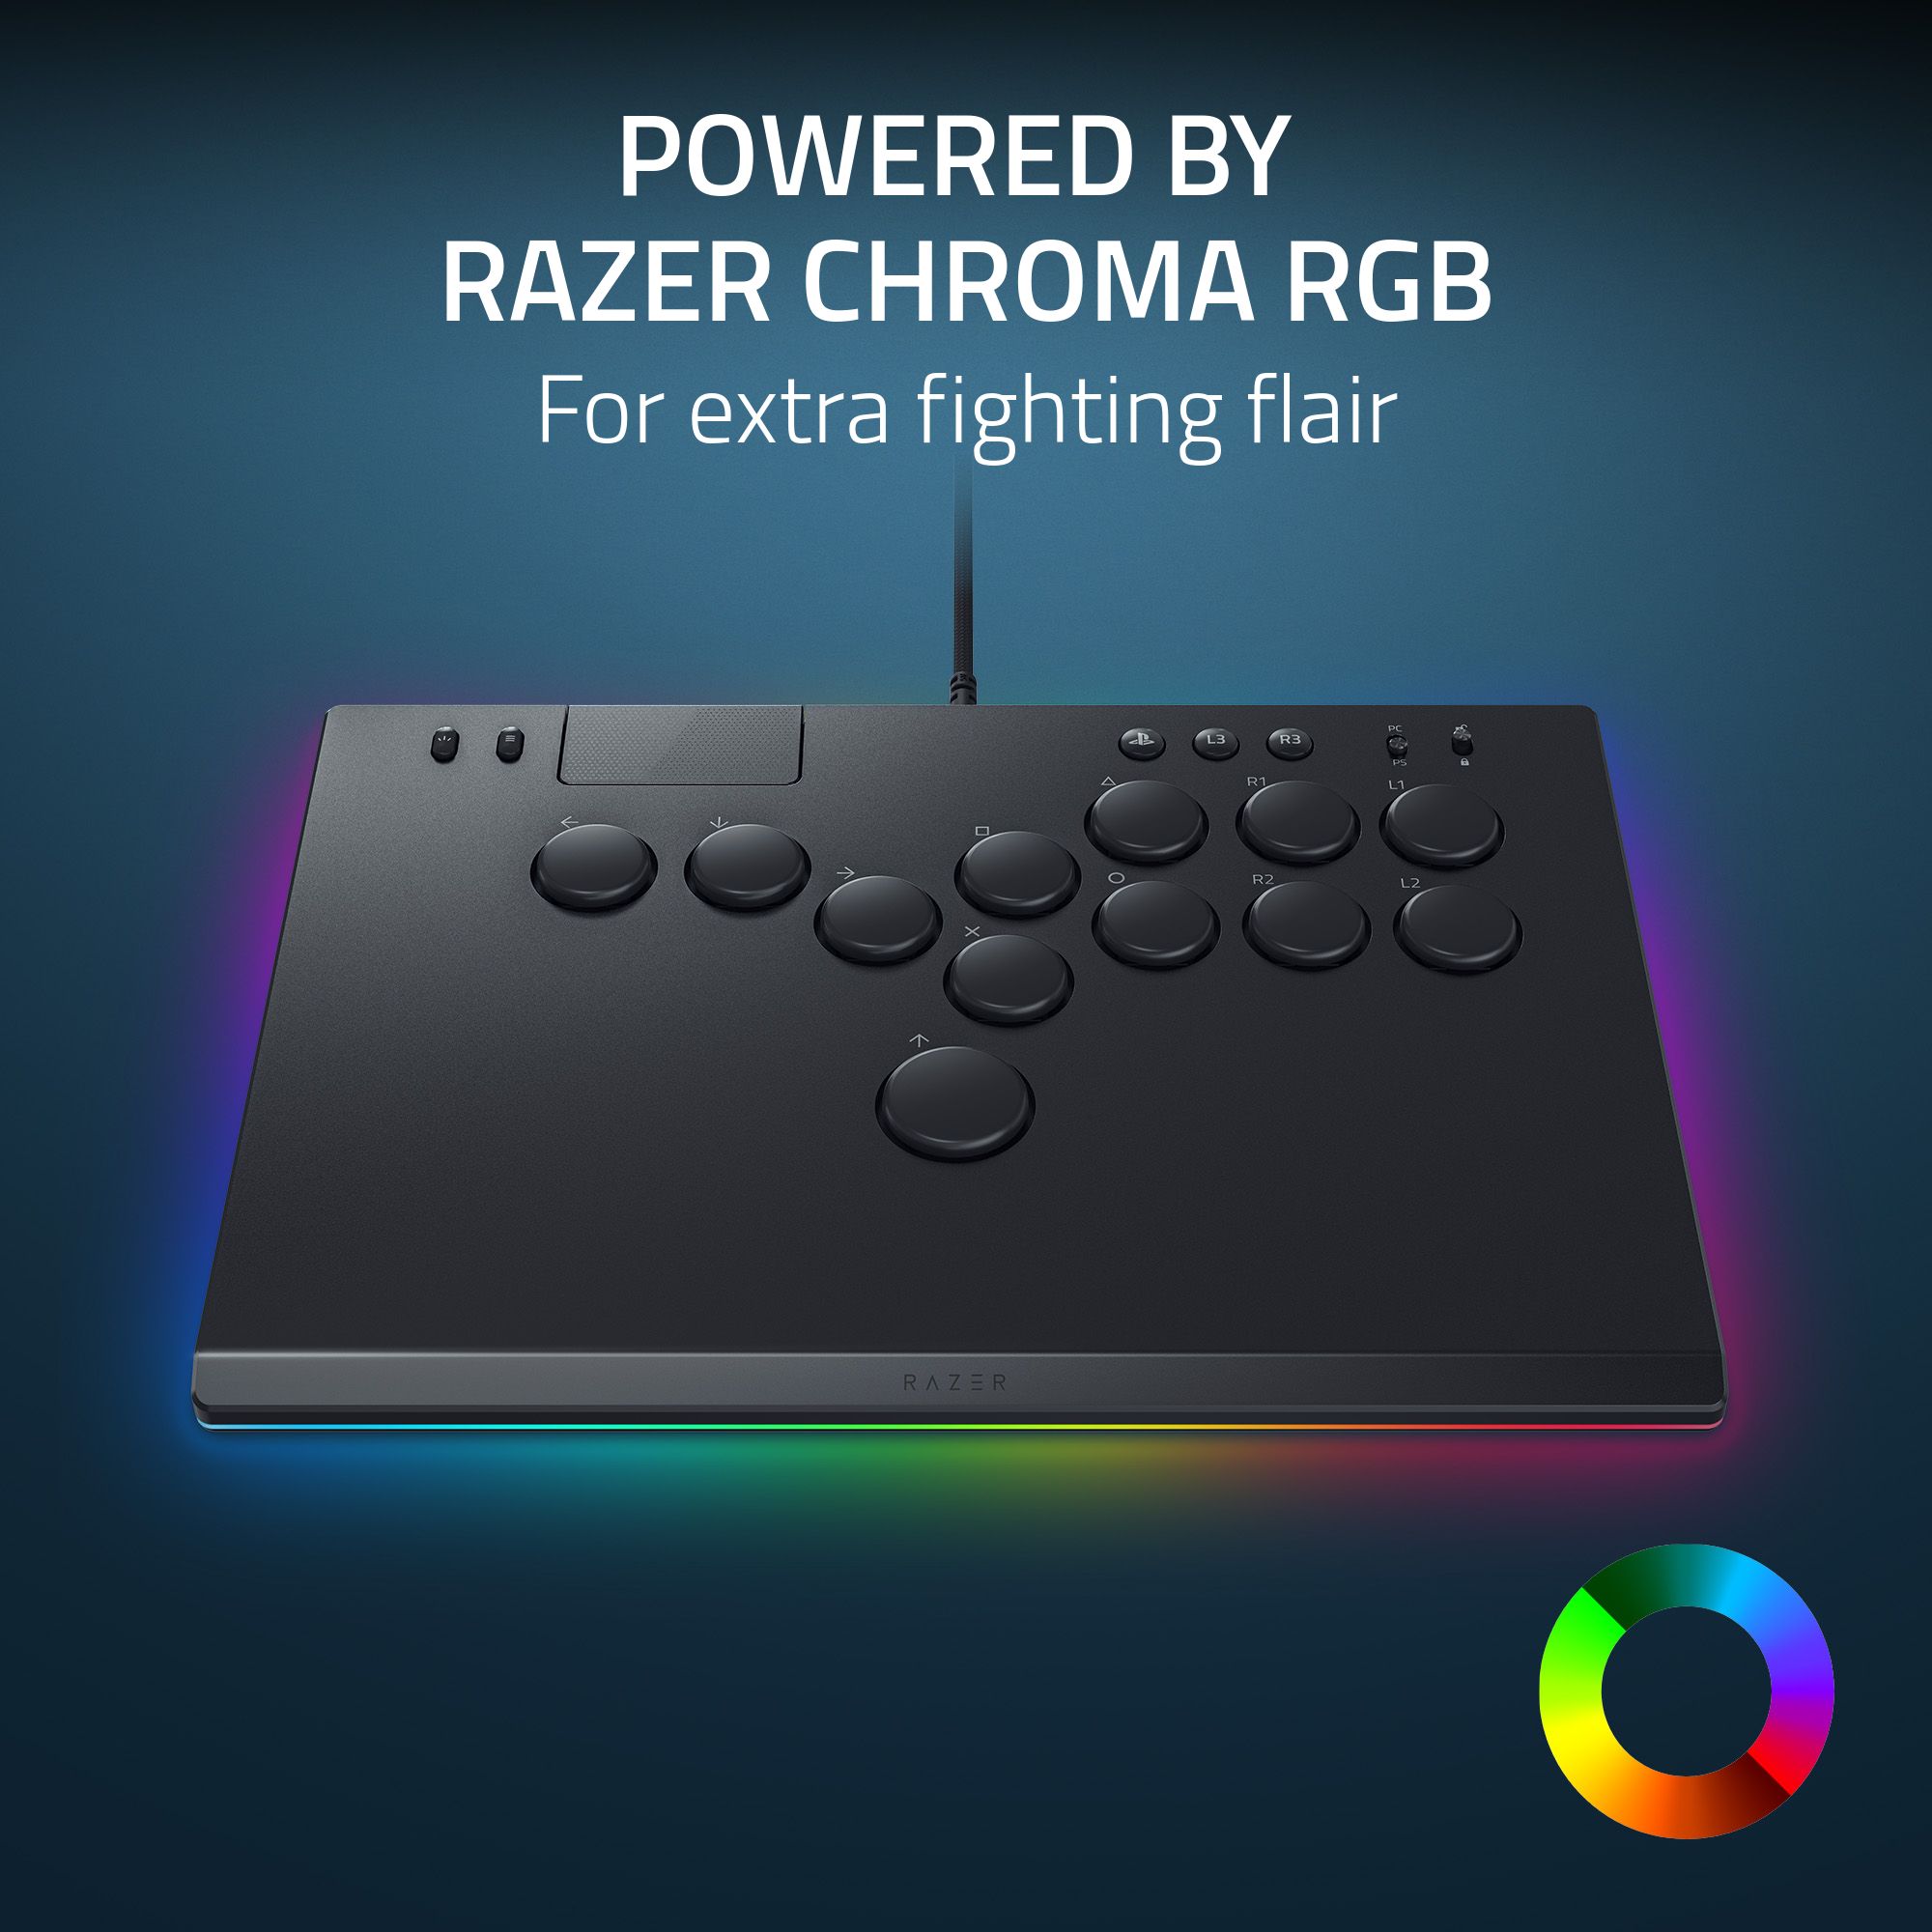 [NEW] Razer Kitsune - All-Button Optical Arcade Controller for PS5™ and PC (Bộ điều khiển Arcade) | Low-Profile Optical Switches | Slim Form Factor | Removable Top Plate | Chroma RGB Lighting | USB Type C